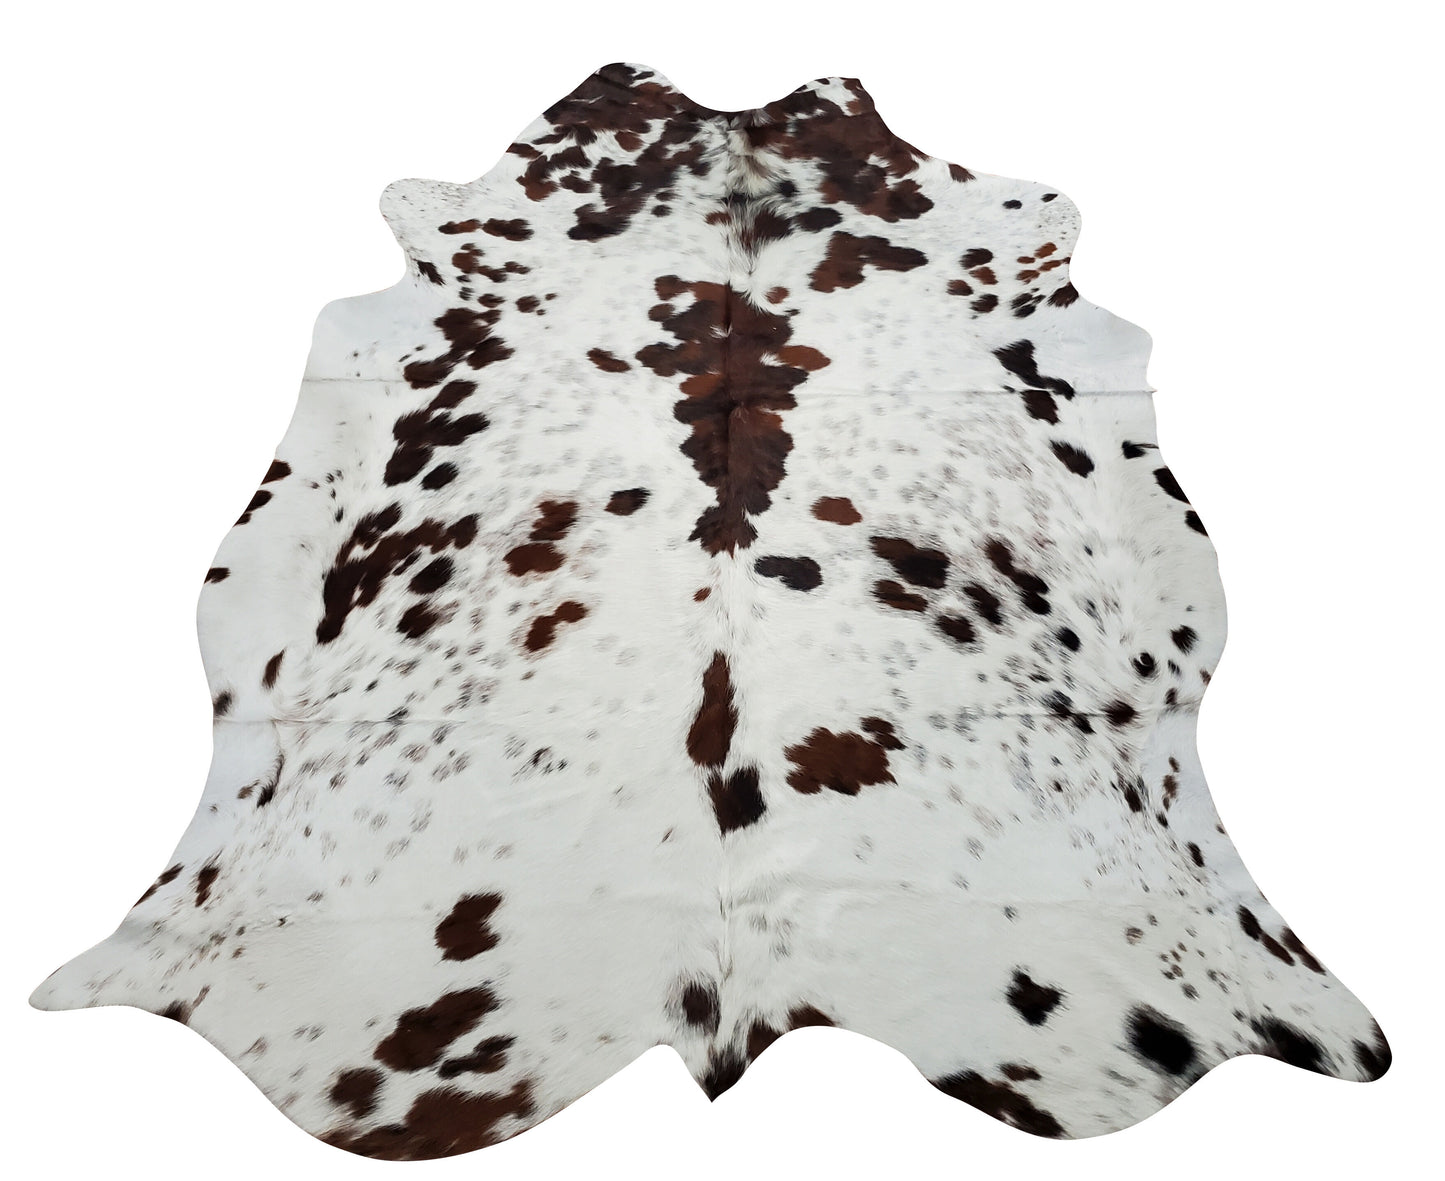 I ordered this salt and pepper cowhide rug for a studio apartment that I am renting, it is gorgeous everything that picture was and it also came quick.